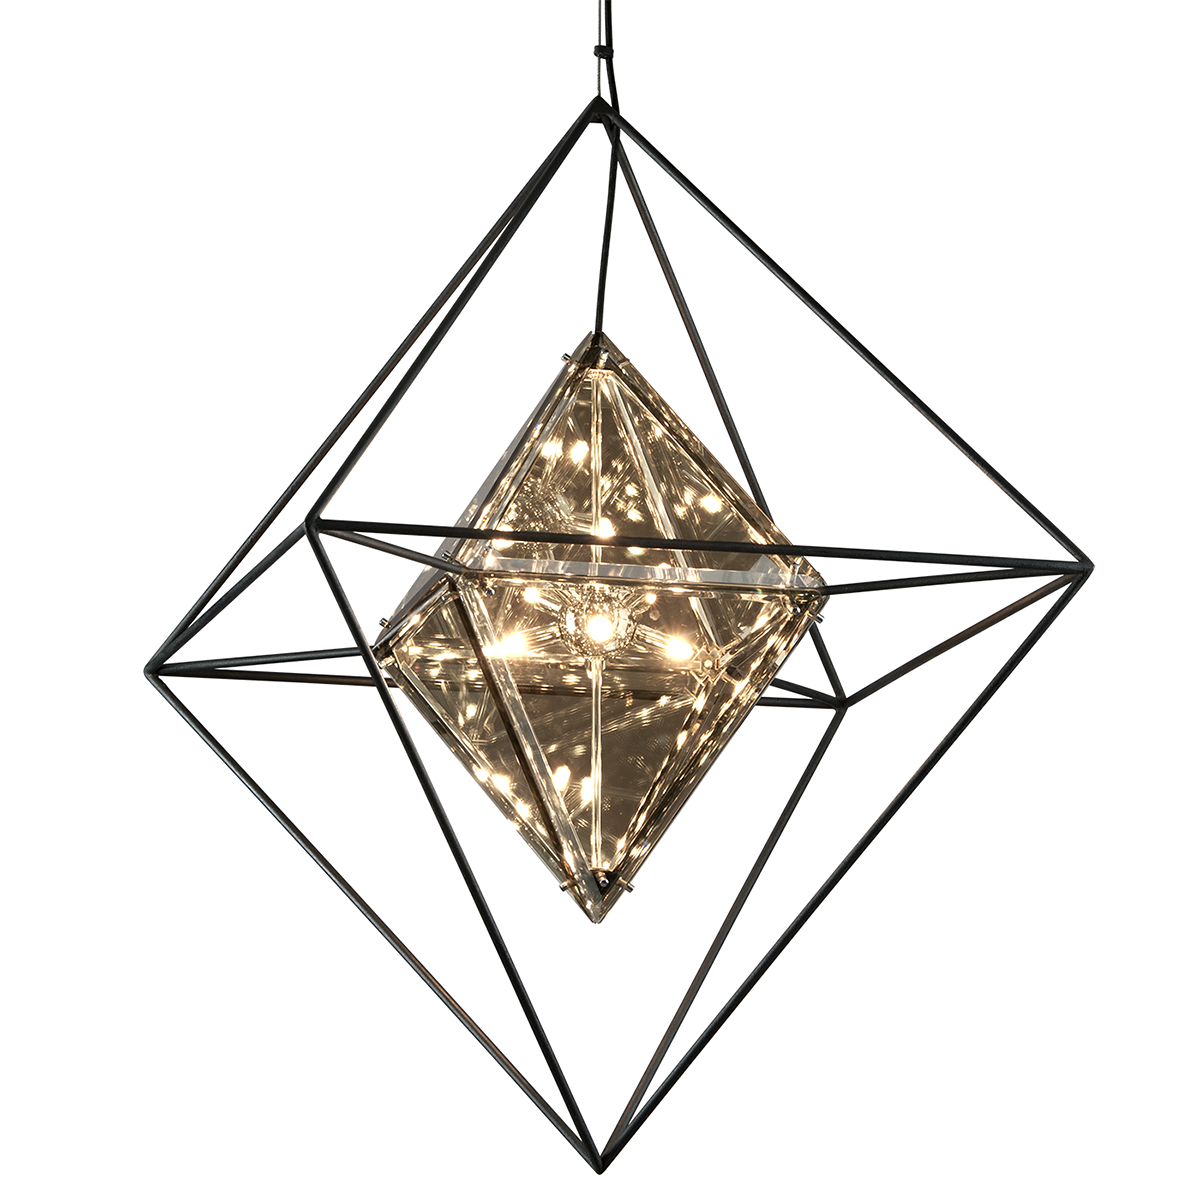 Hudson Valley Lighting Epic Pendant Light with Hand-Worked Iron with 8 Lights